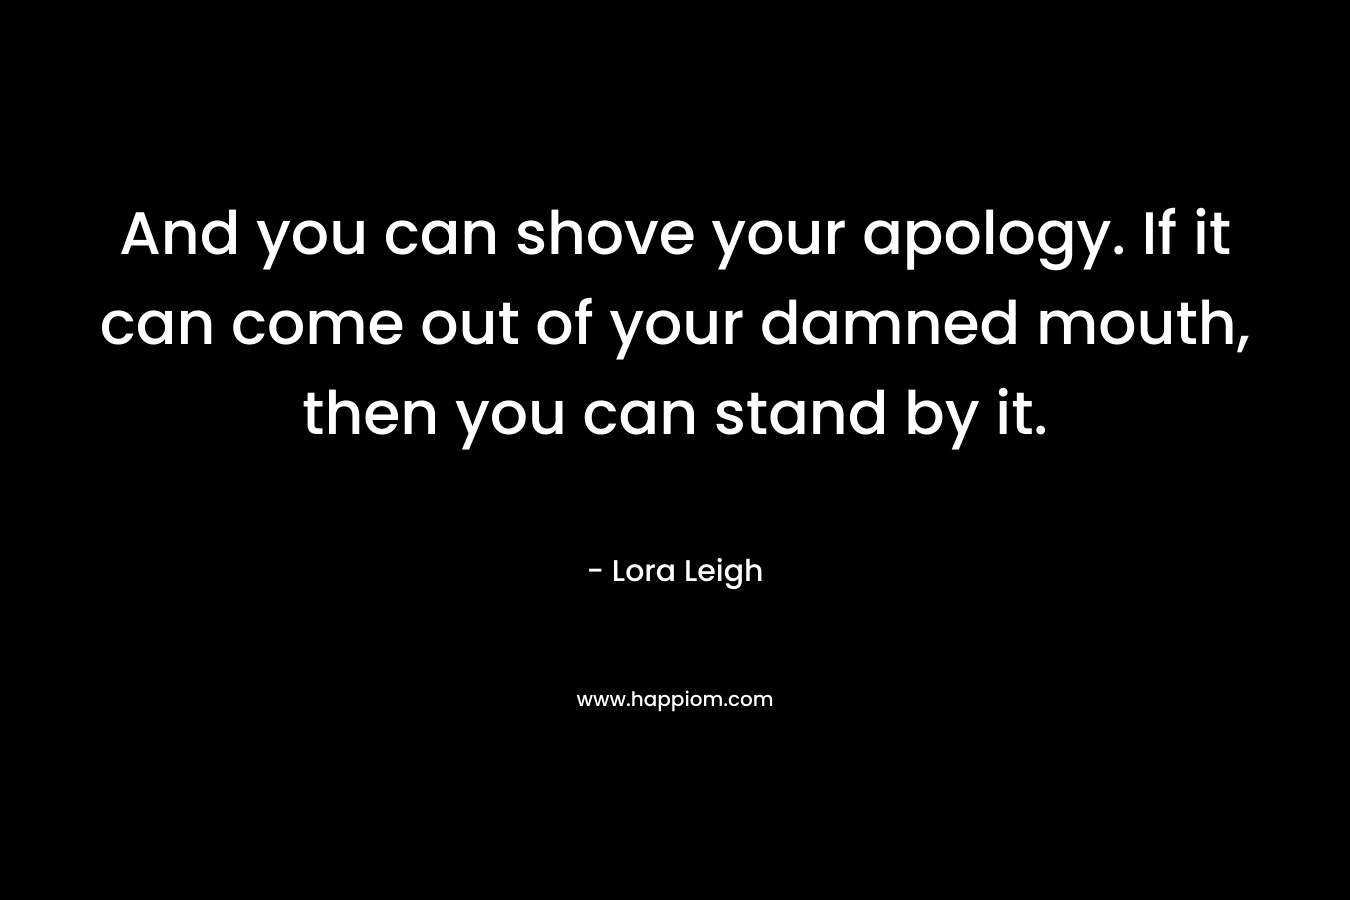 And you can shove your apology. If it can come out of your damned mouth, then you can stand by it.